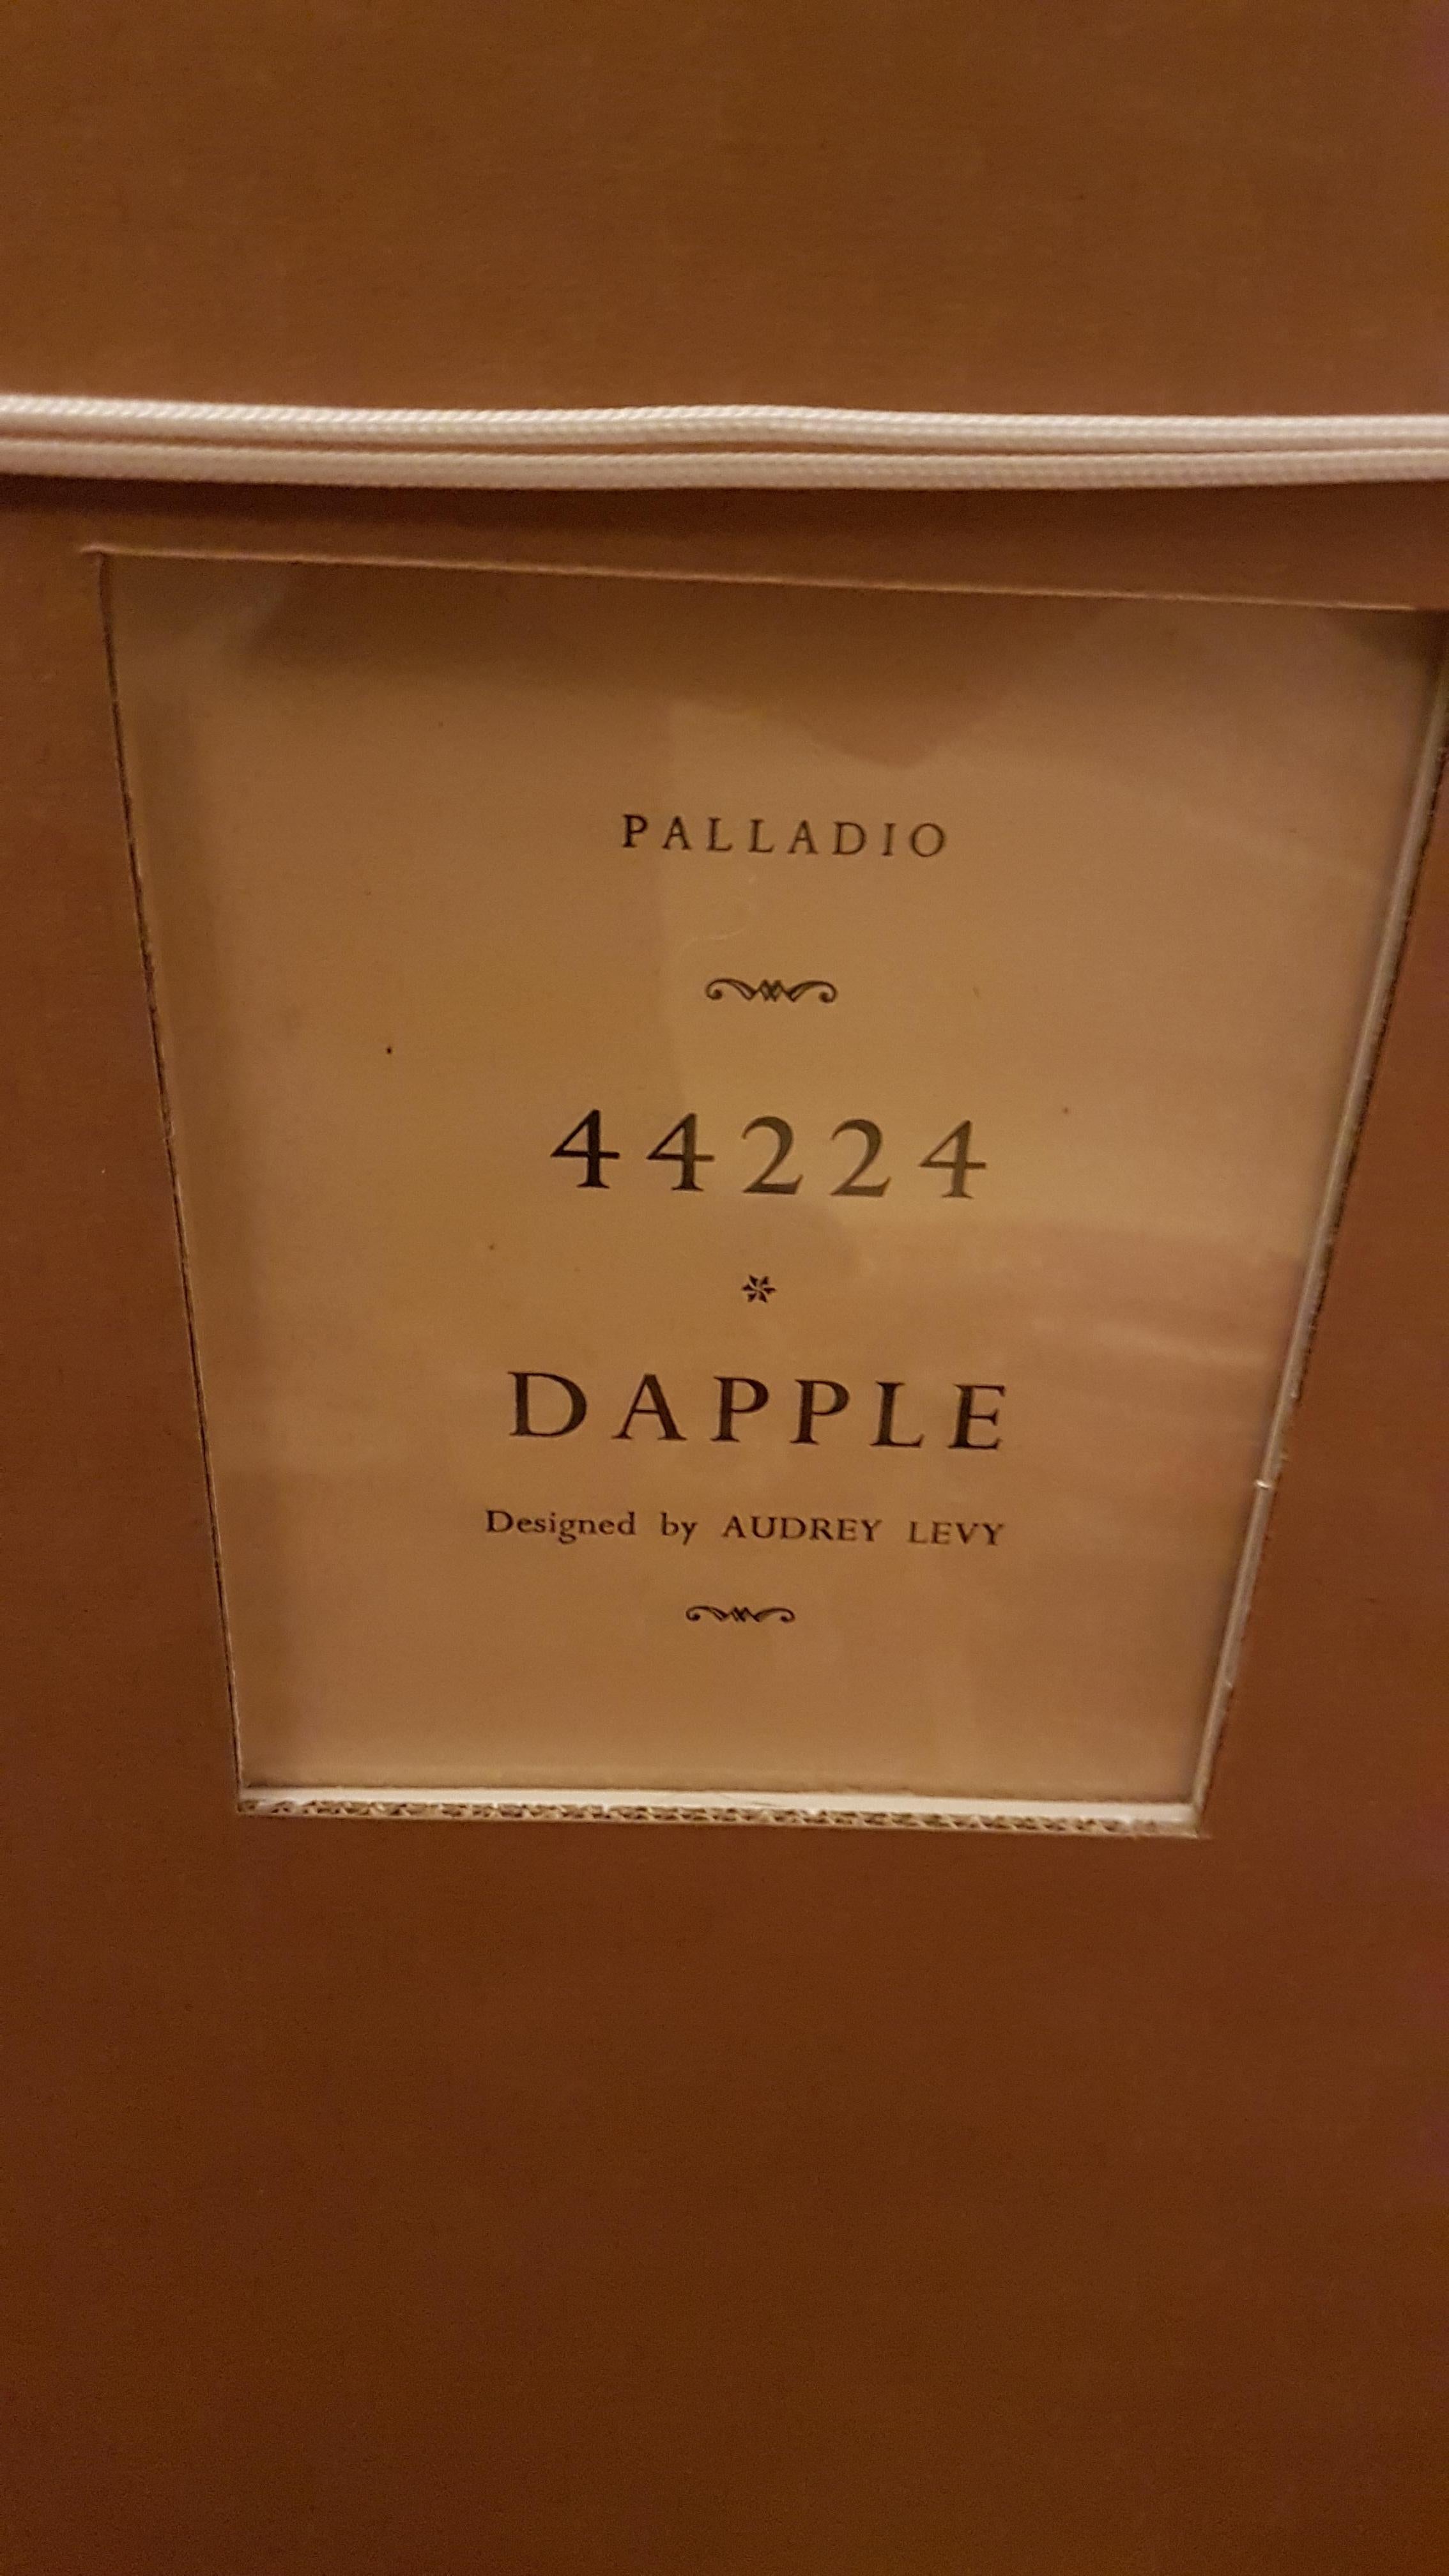 This is an original wallpaper sample from 1957 called Dapple which was designed by Audrey Levy for Palladio which later became Sanderson. We have had it freshly framed in an elegant rounded matt black frame with glass front and ivory white framing